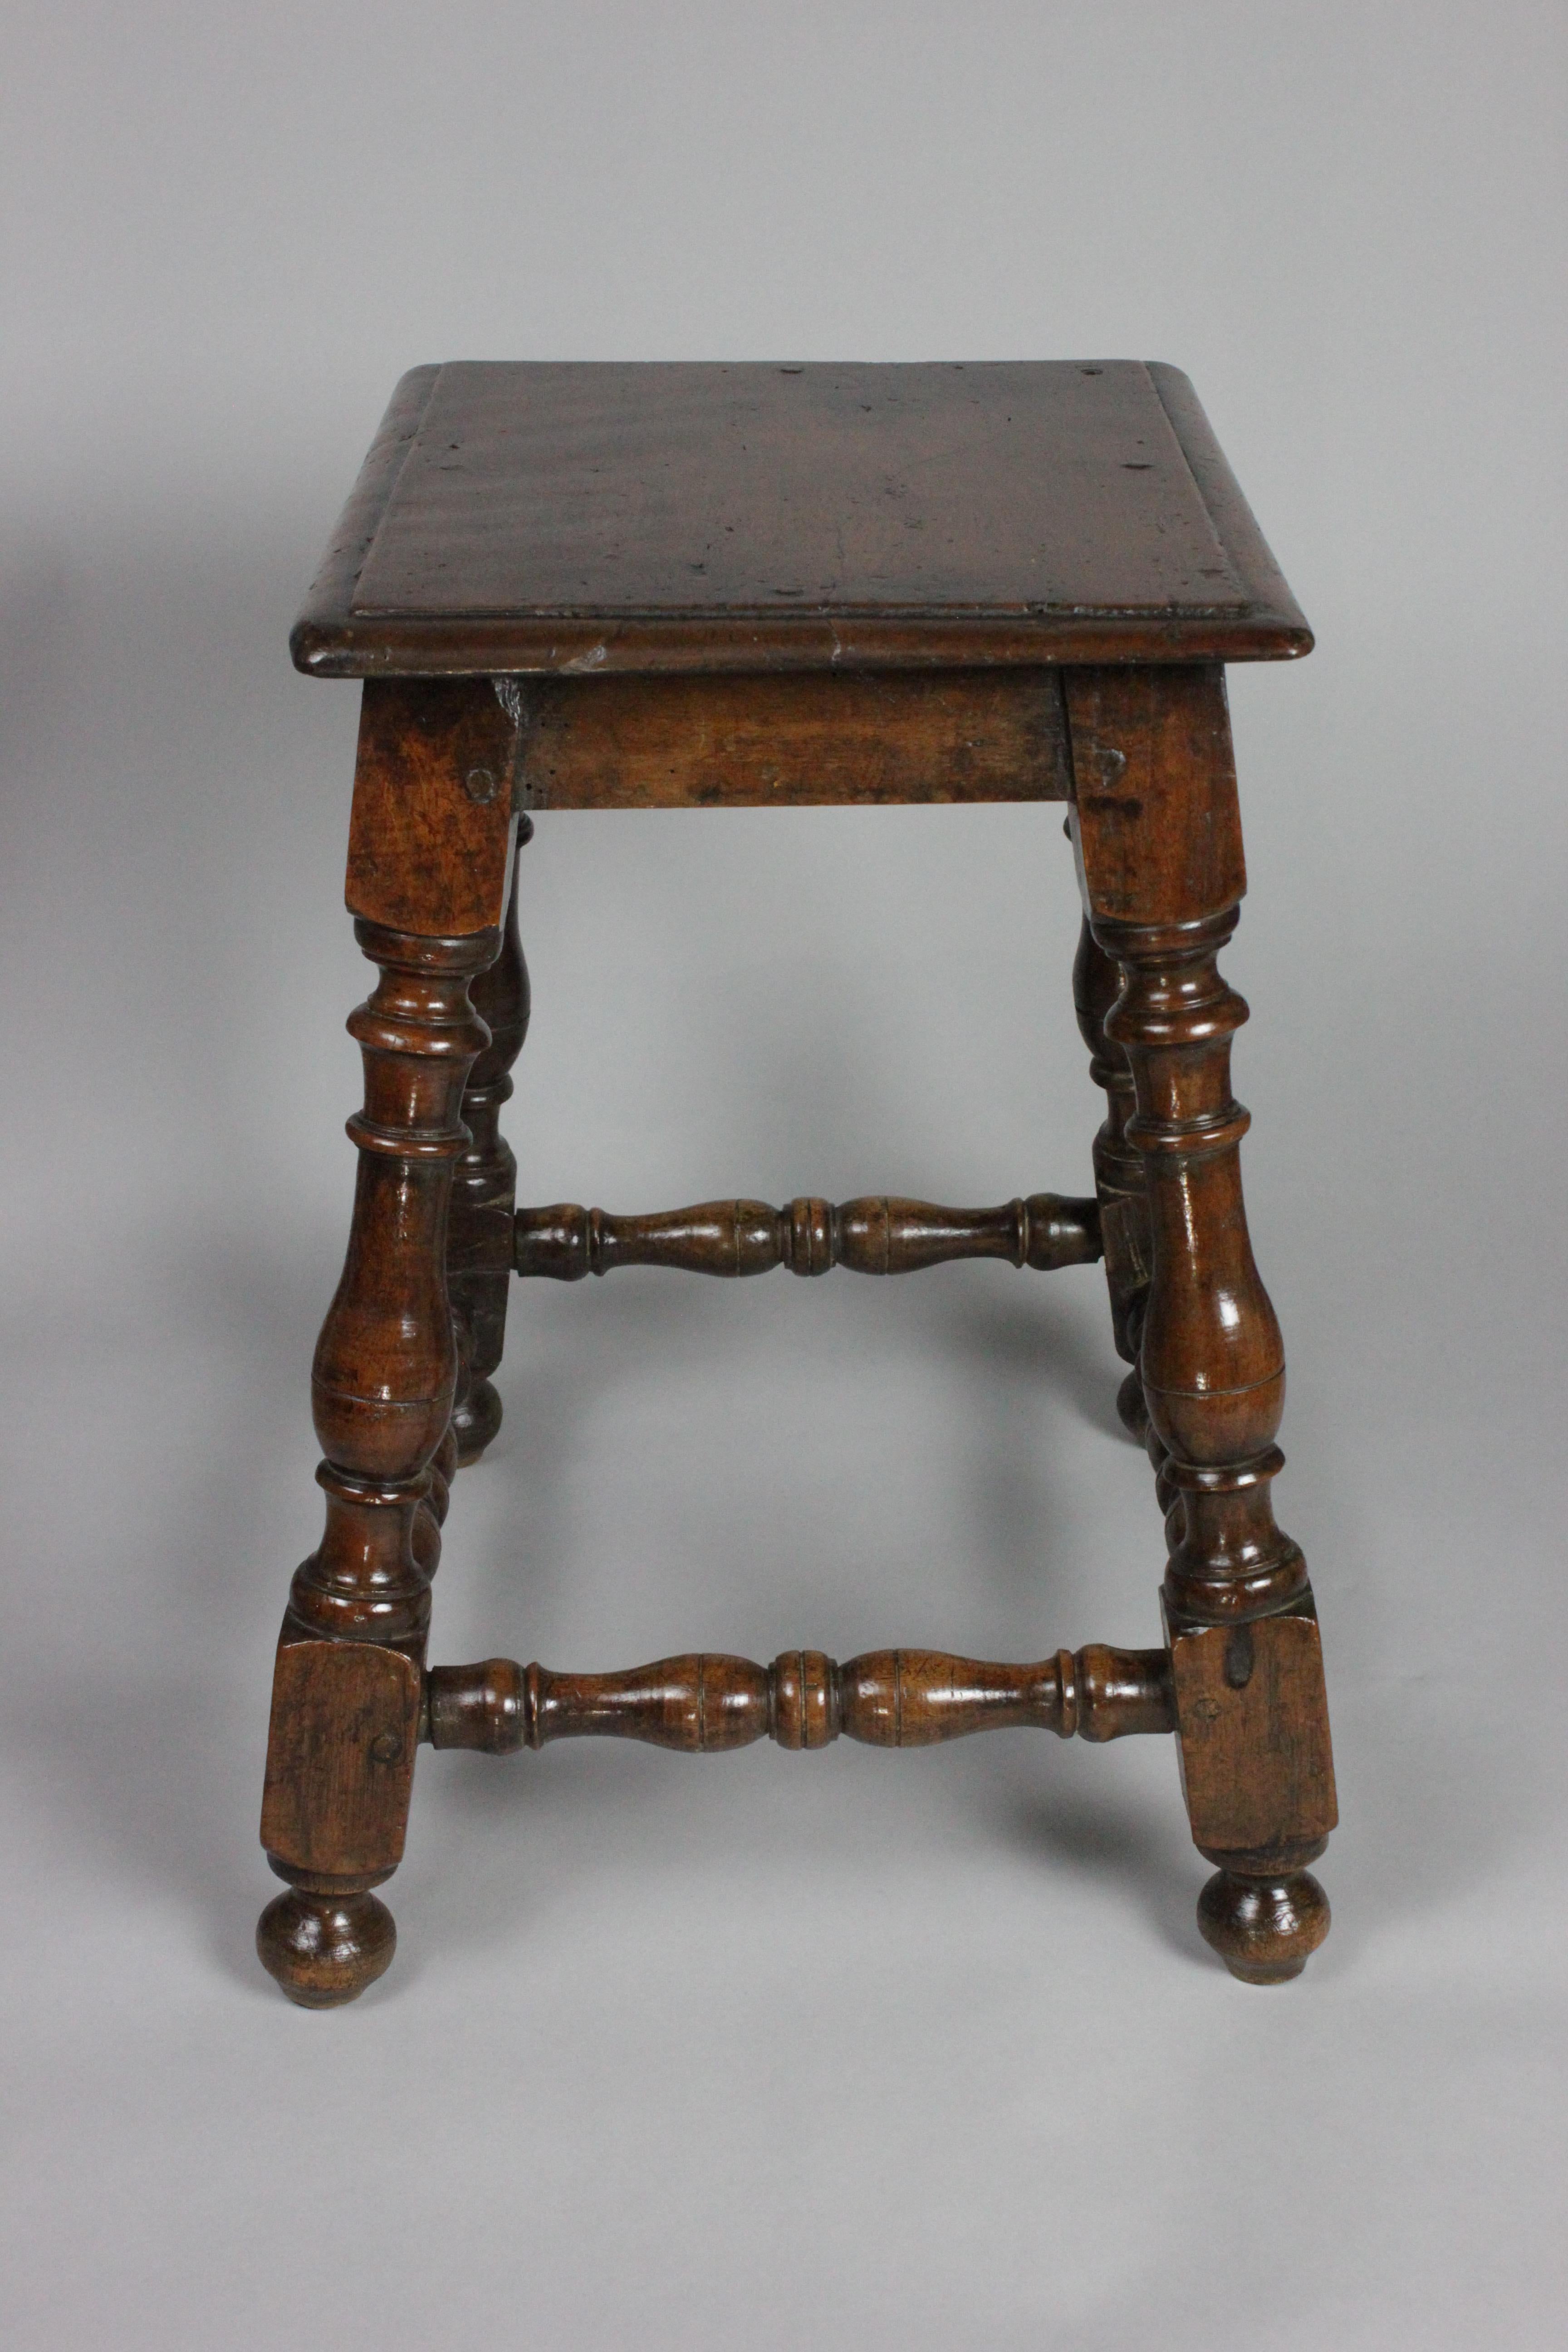 A decorative late 17th century Spanish walnut stool, circa 1680. Crafted with meticulous attention to detail, this stool showcases the rich beauty of walnut, gracefully shaped into an elegant design. The finely turned legs and sturdy stretchers add